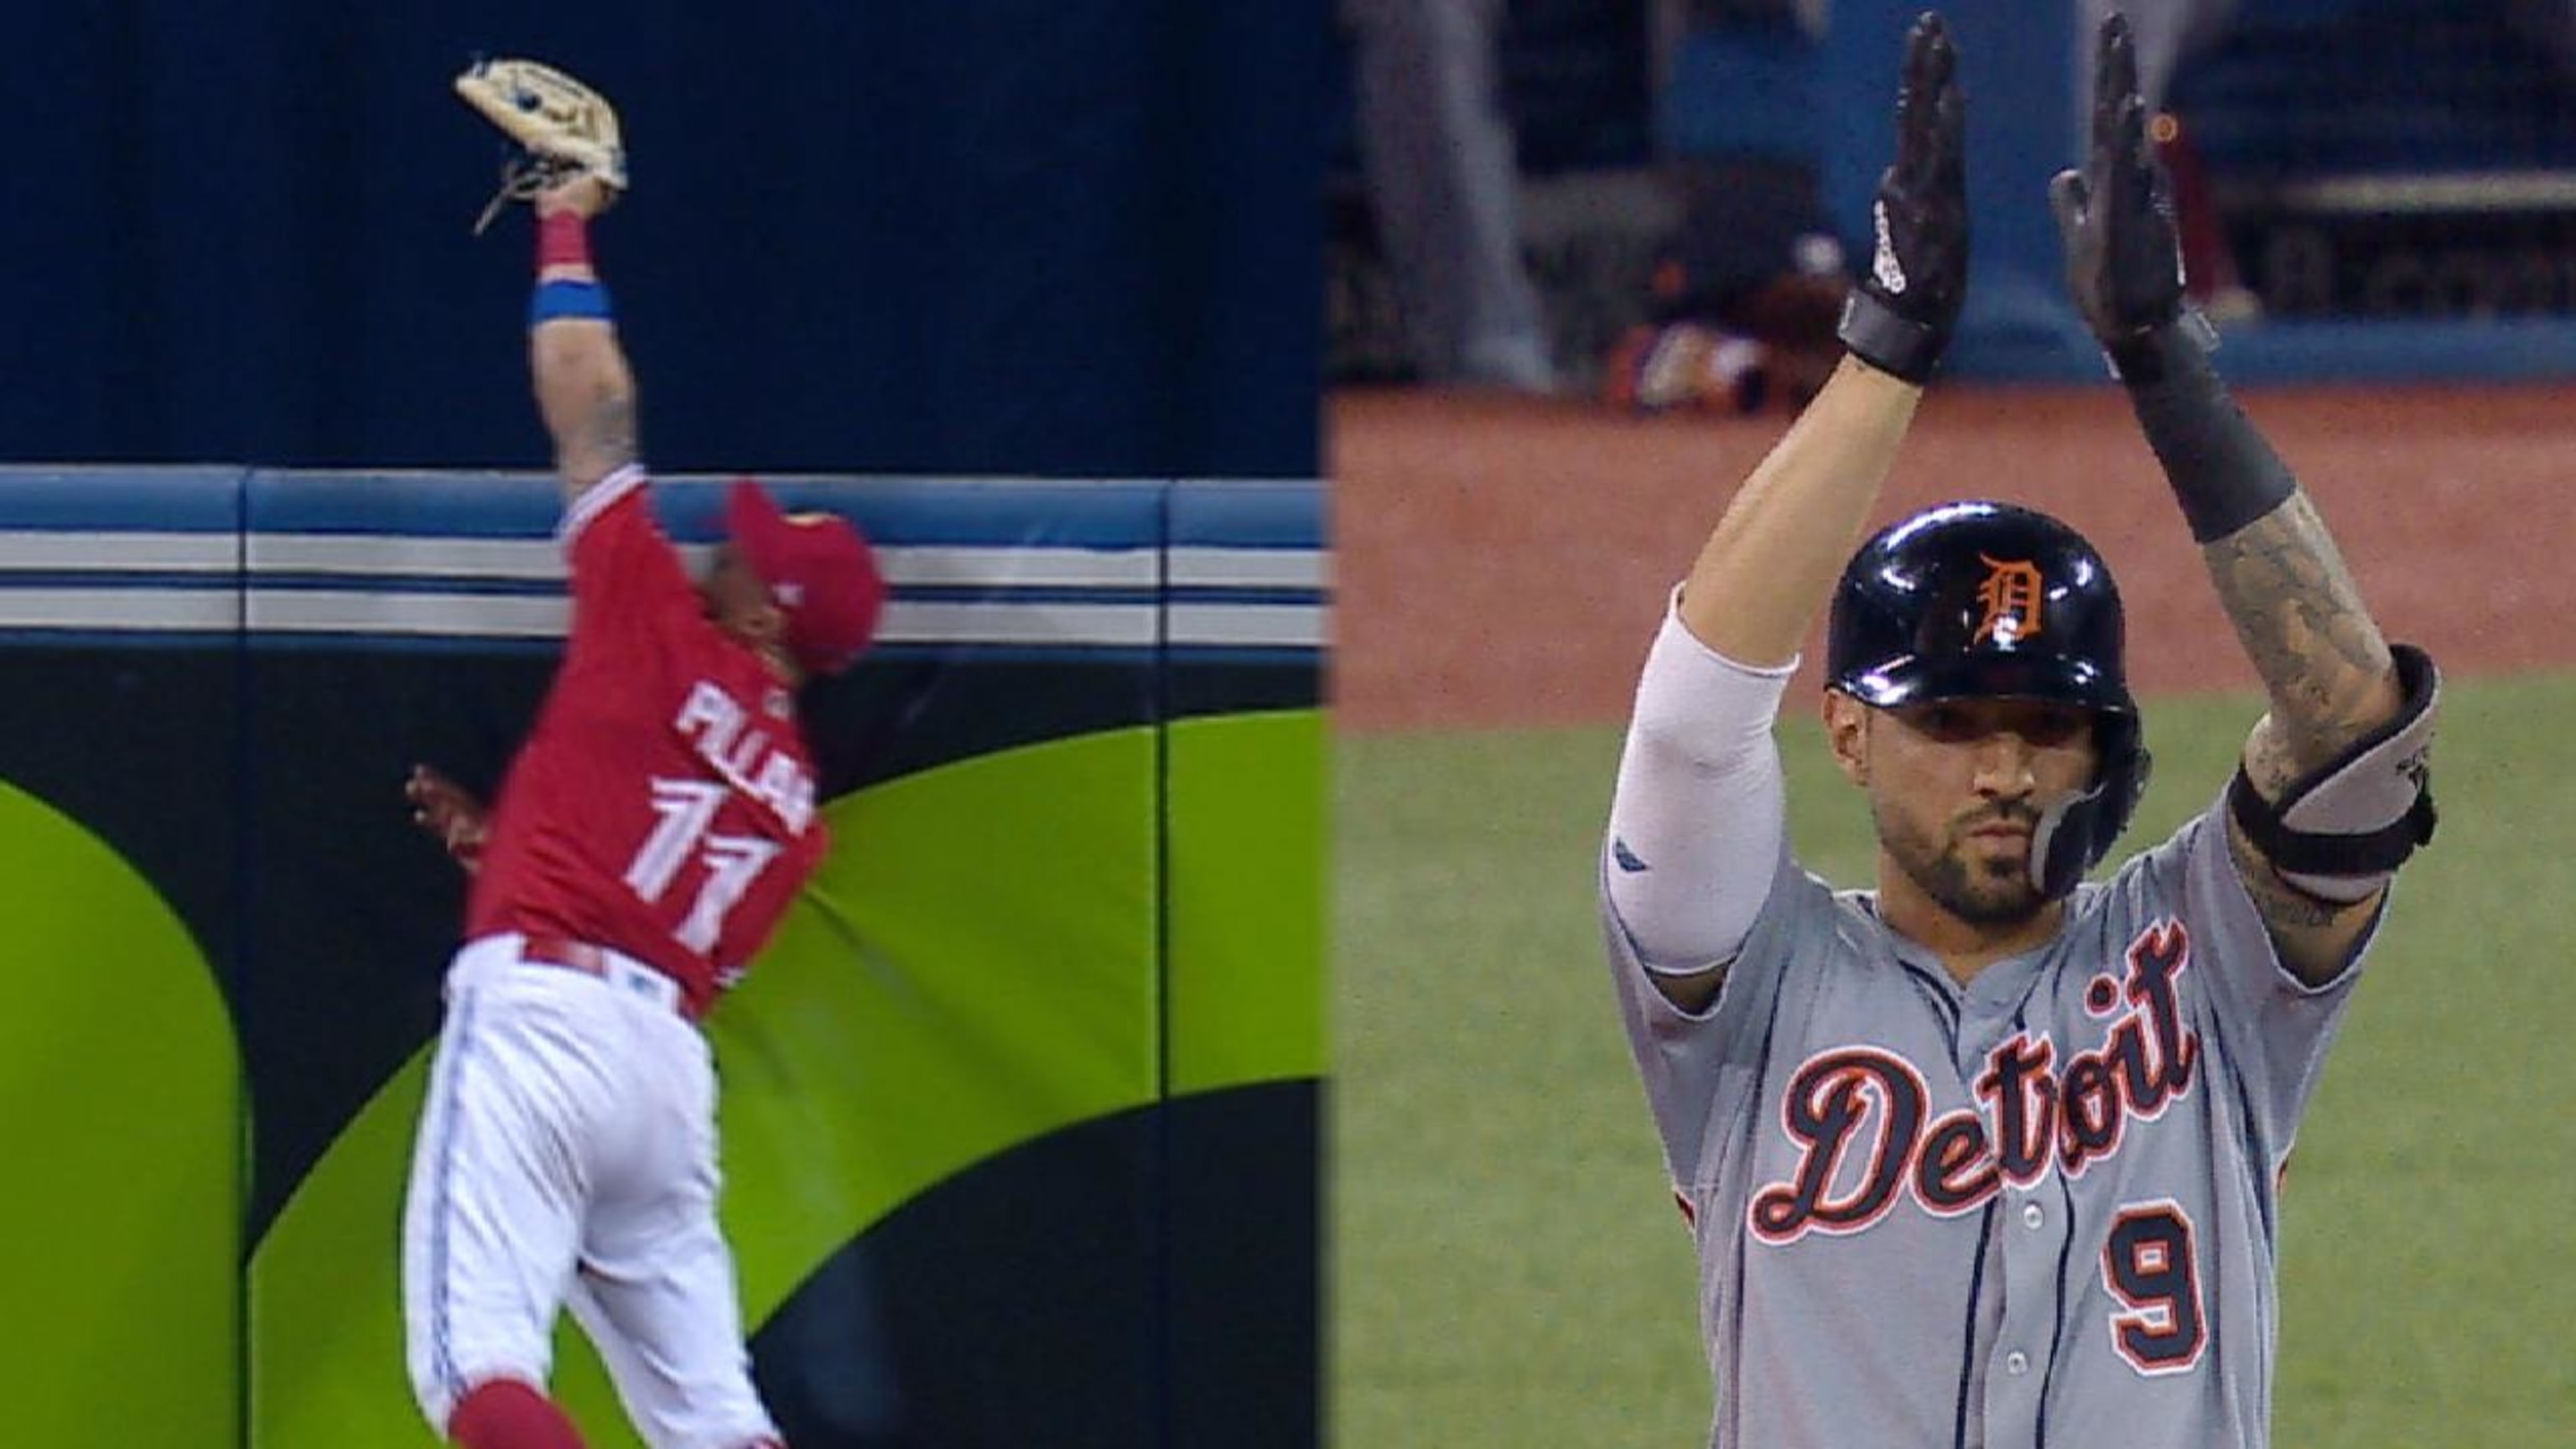 Kevin Pillar and Nicholas Castellanos had a spirited chat about